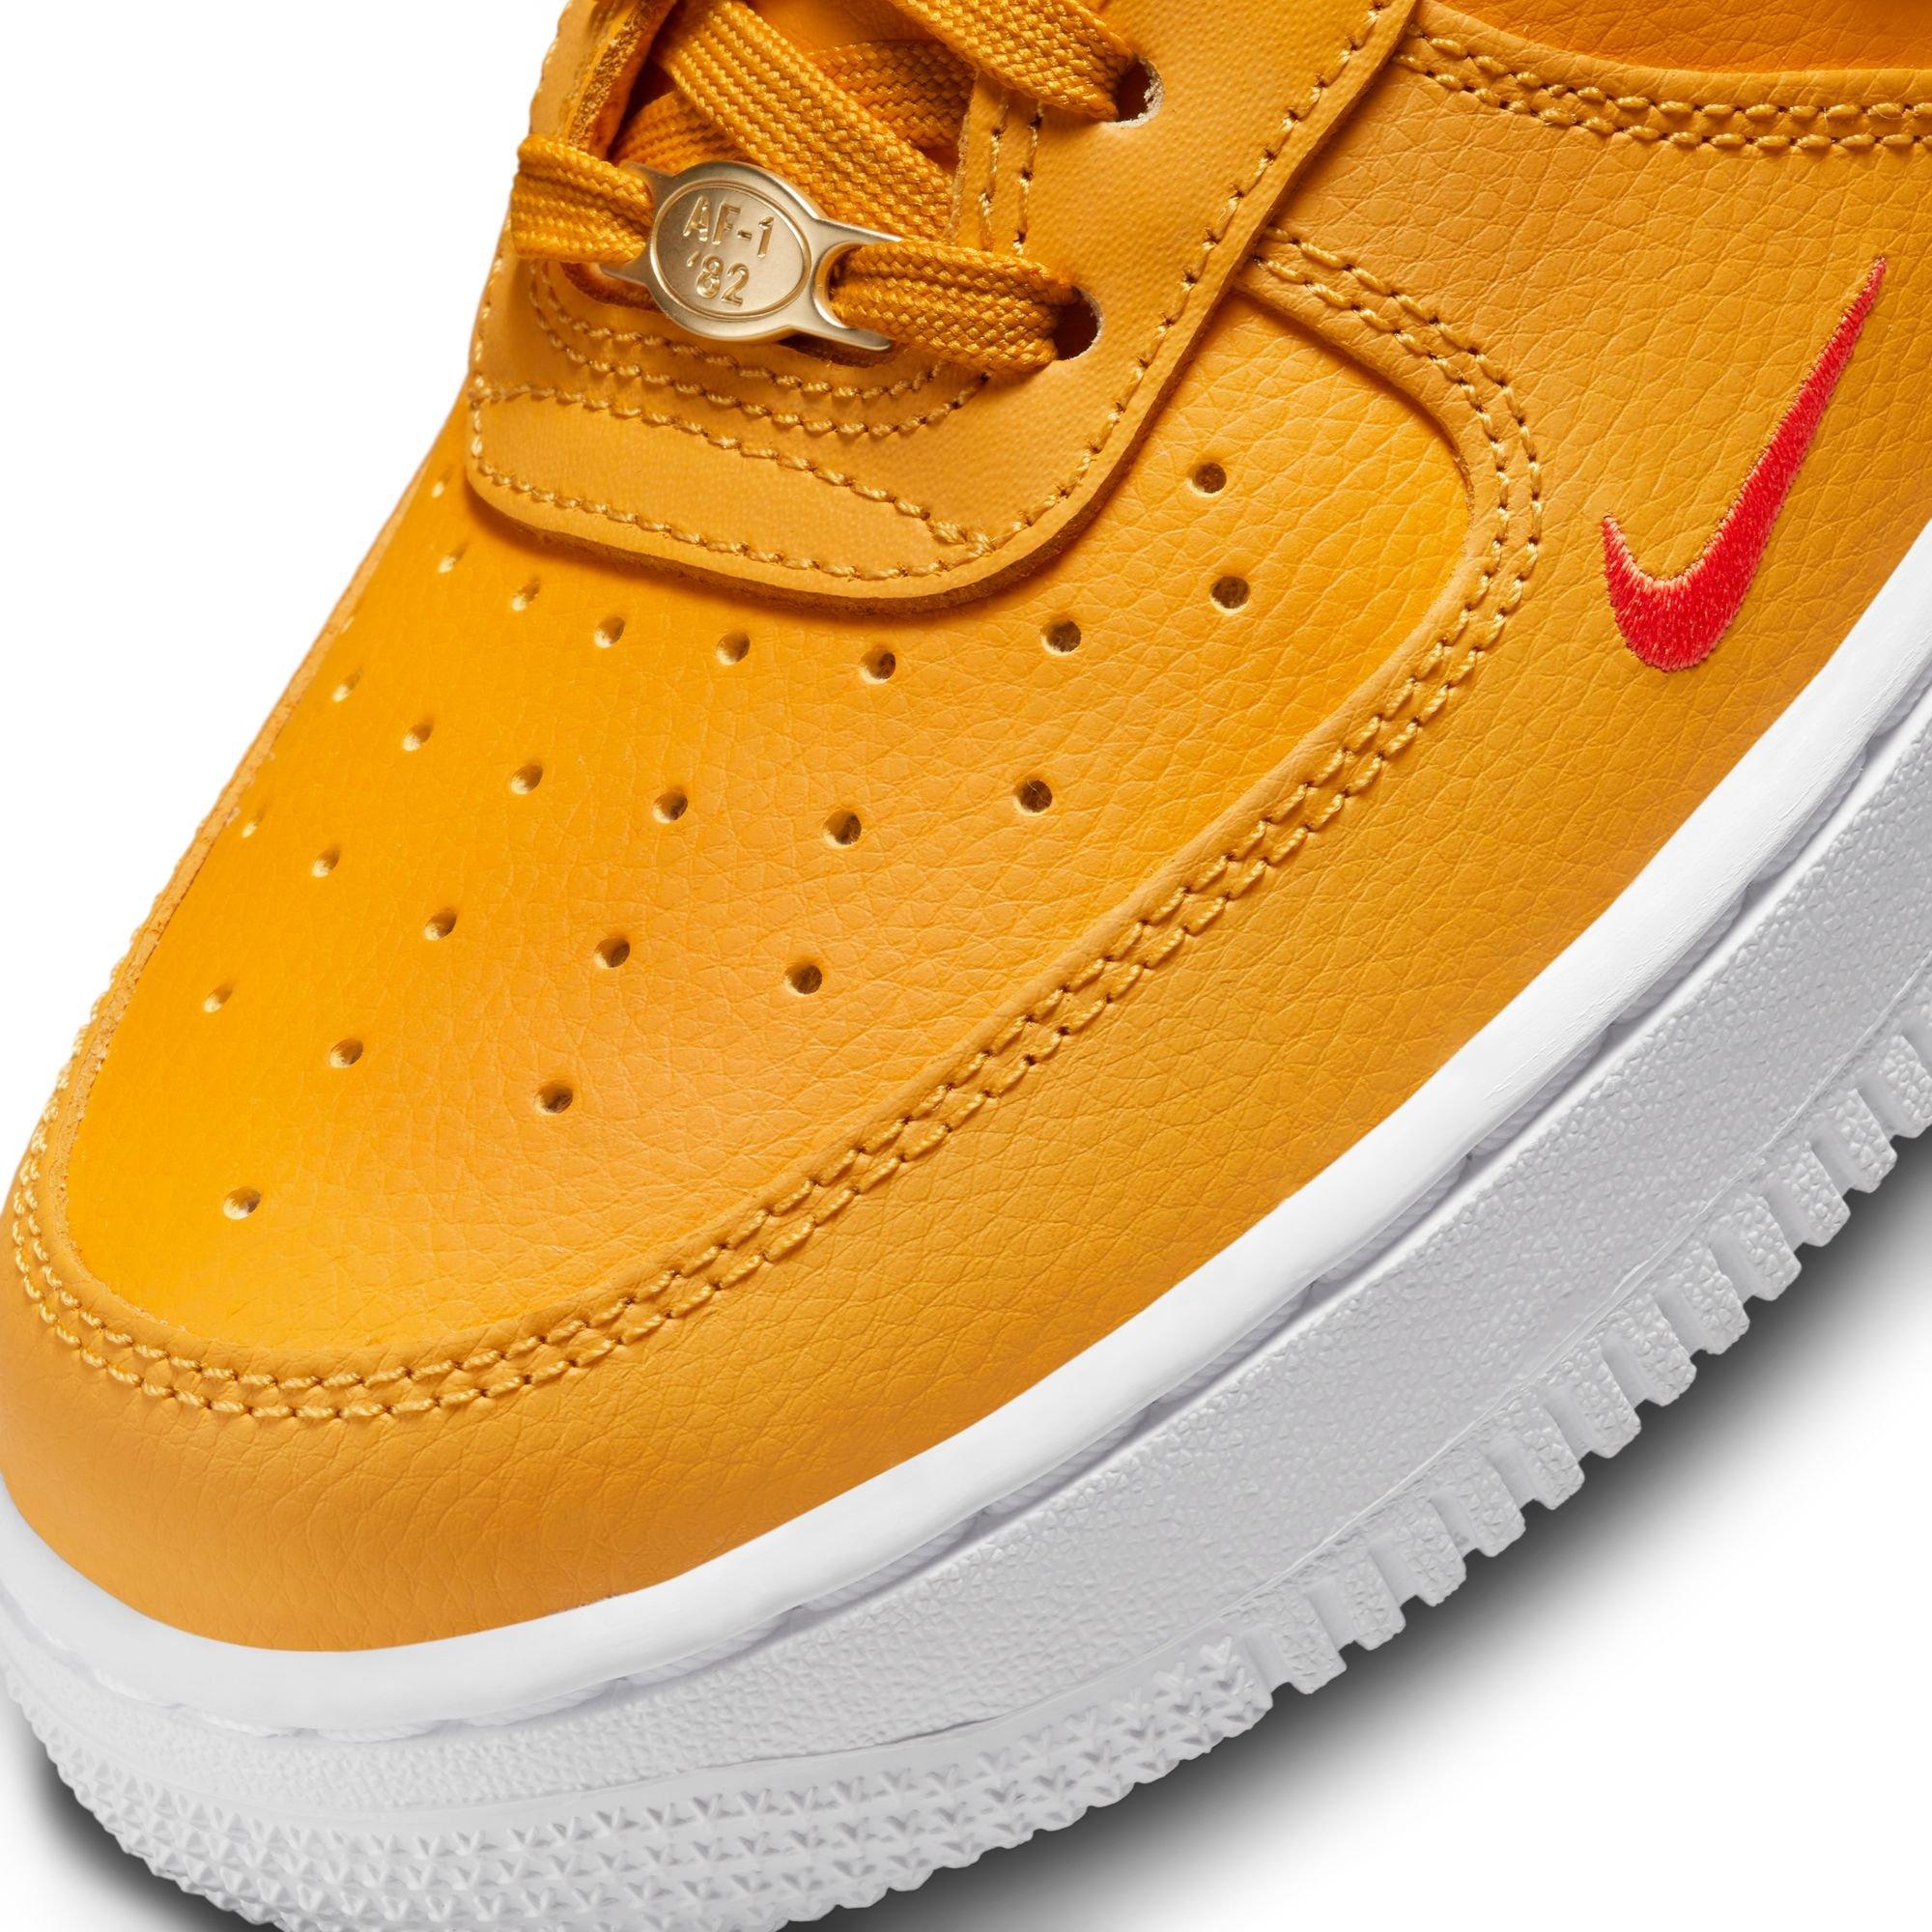 Air Force 1 High Suede 'Yellow Ochre